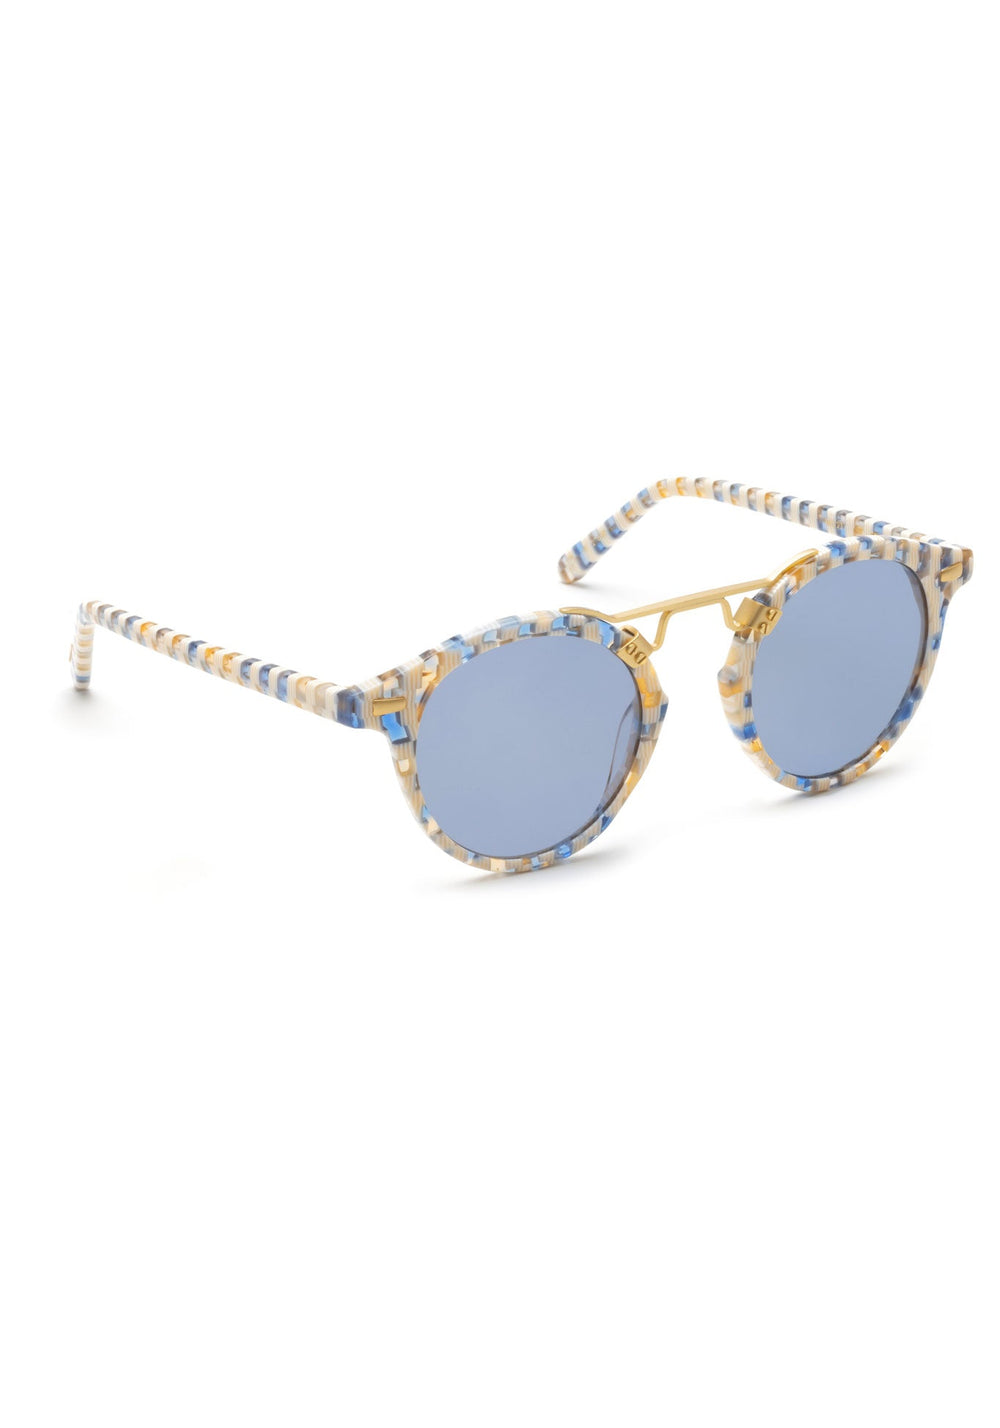 KREWE SUNGLASSES - ST. LOUIS CLASSICS | Pincheck 18K + Custom Vanity Tint handcrafted, luxury blue and white checkered round sunglasses with blue tinted lenses